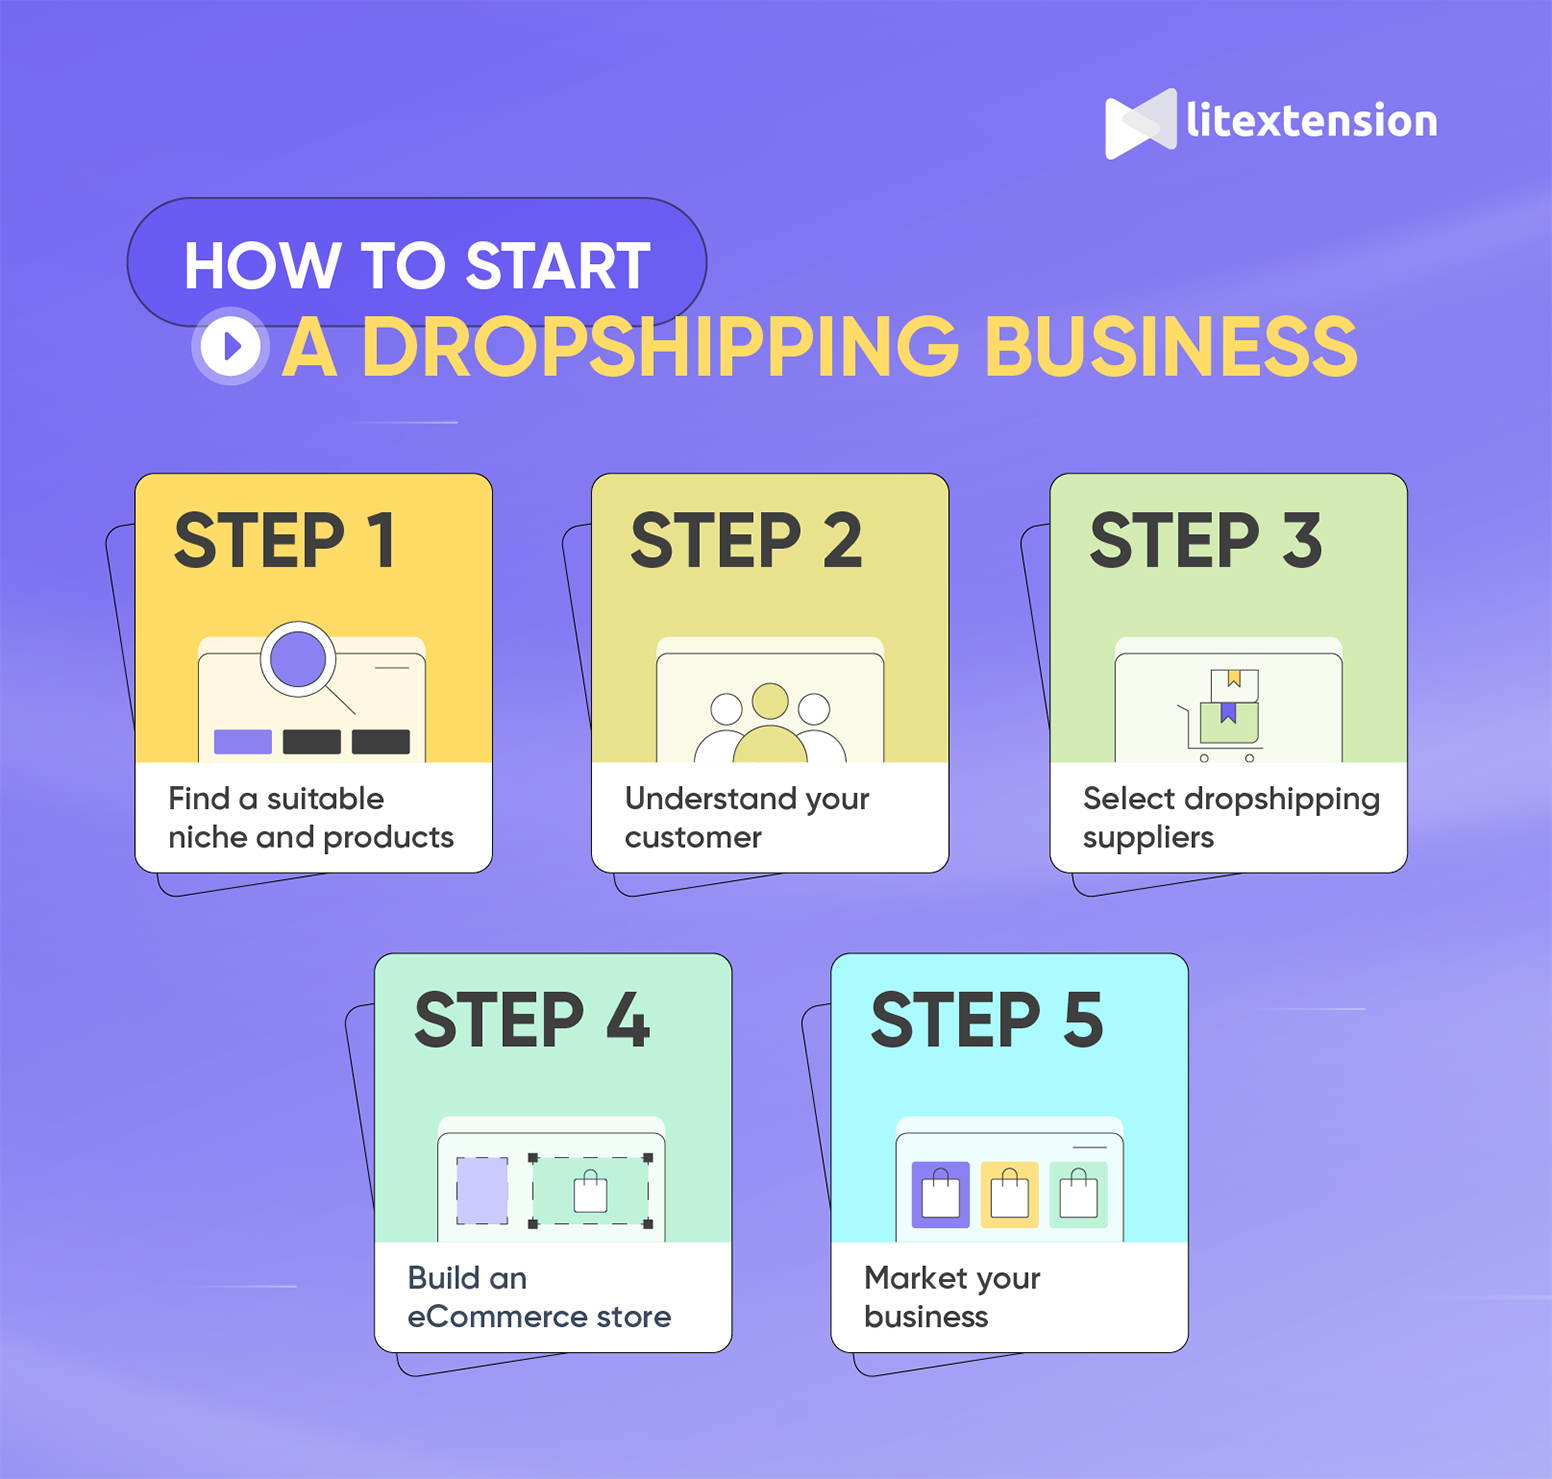 how to start a dropshipping in 5 steps litextension